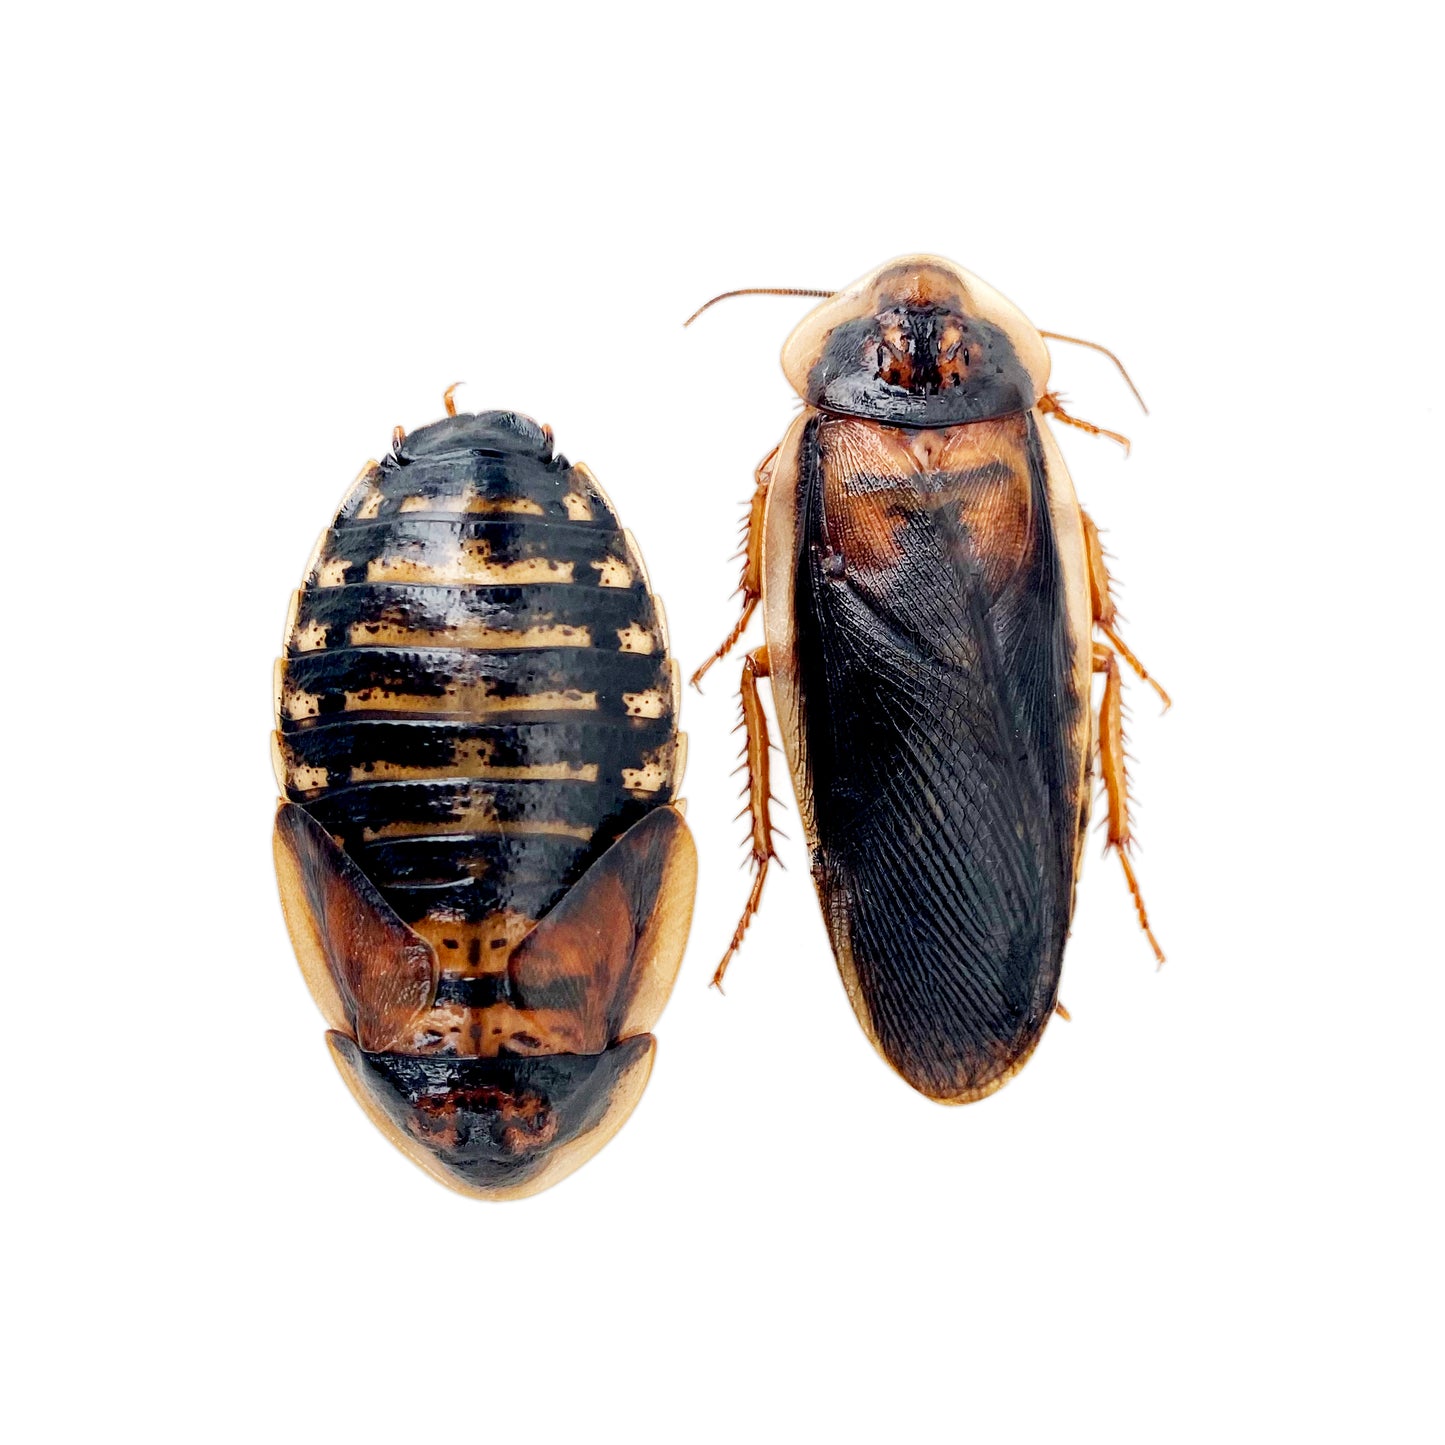 Male Adult Dubia Roaches